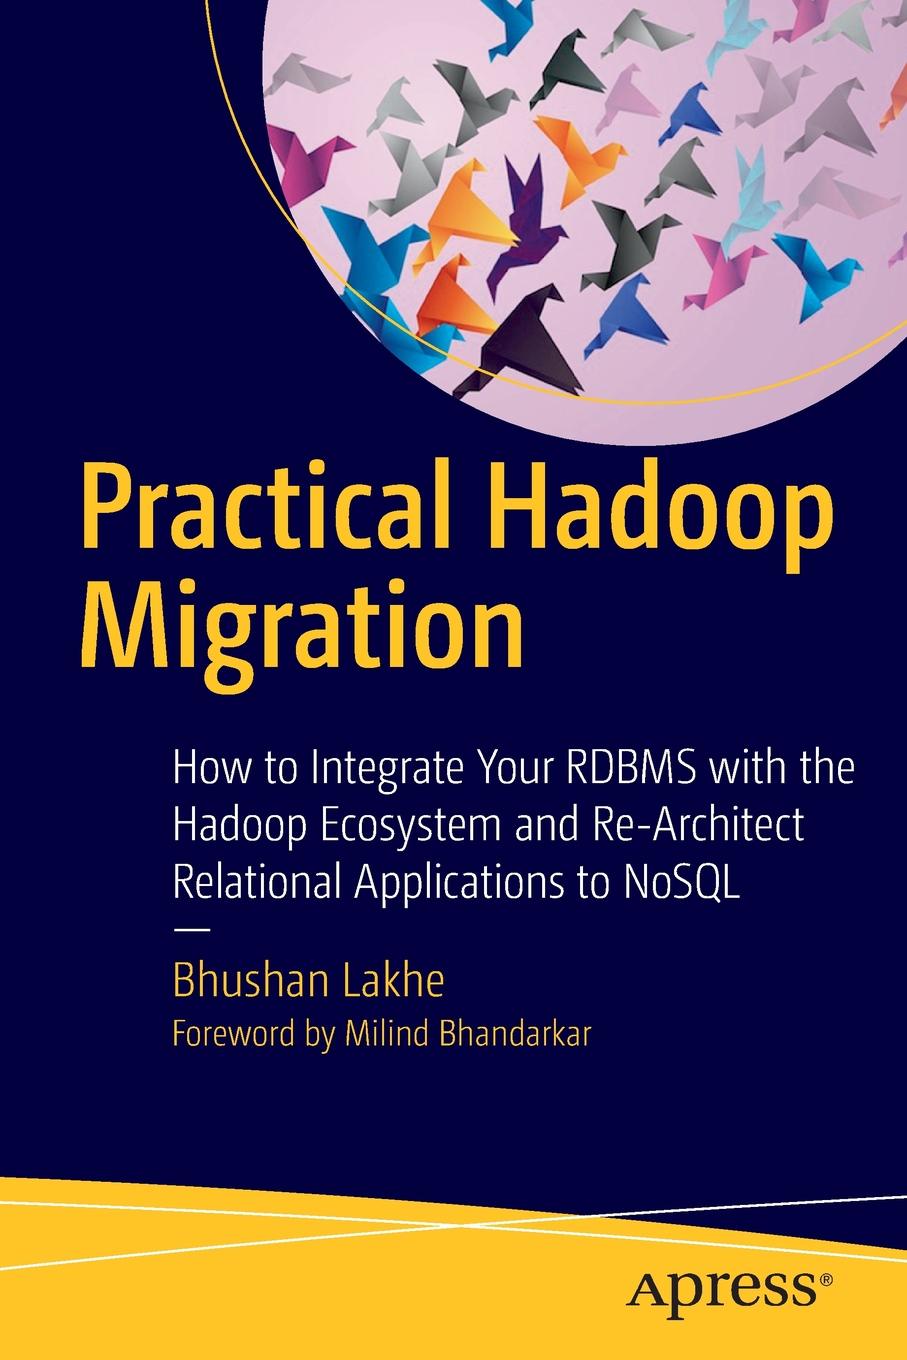 Practical Hadoop Migration. How to Integrate Your RDBMS with the Hadoop Ecosystem and Re-Architect Relational Applications to NoSQL